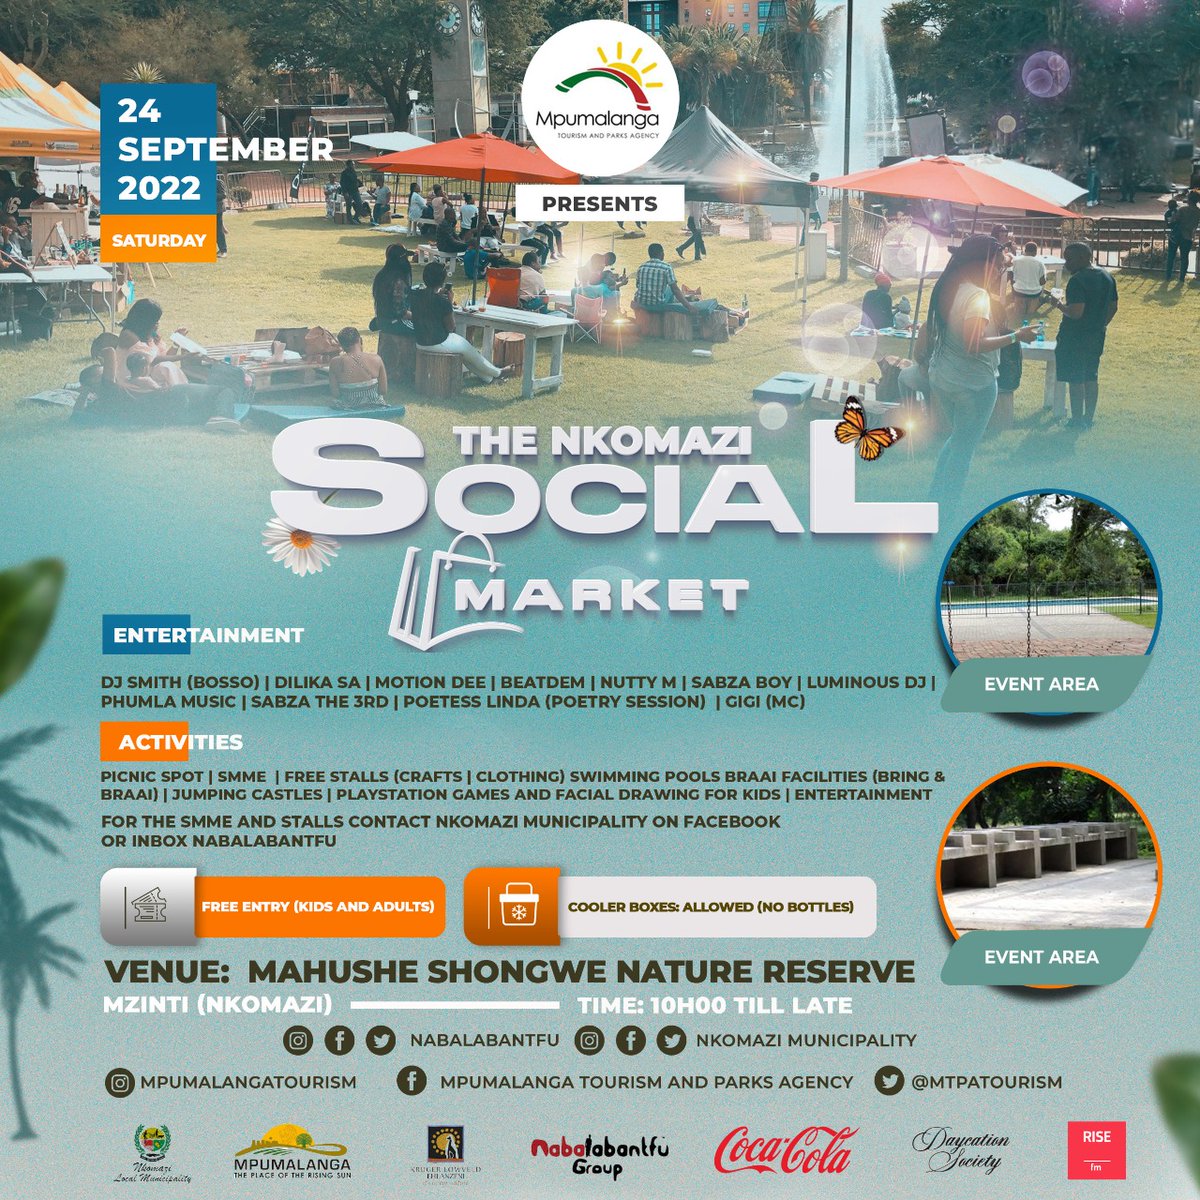 MTPA brings us the Nkomazi Social Market on the 24th of September 2022. Free entry! Free cooler boxes! Bring and braai and See flyer for more details, Event Produced by NABALABANTFU #NkomaziTourism #MpumalangaTourism #Naba